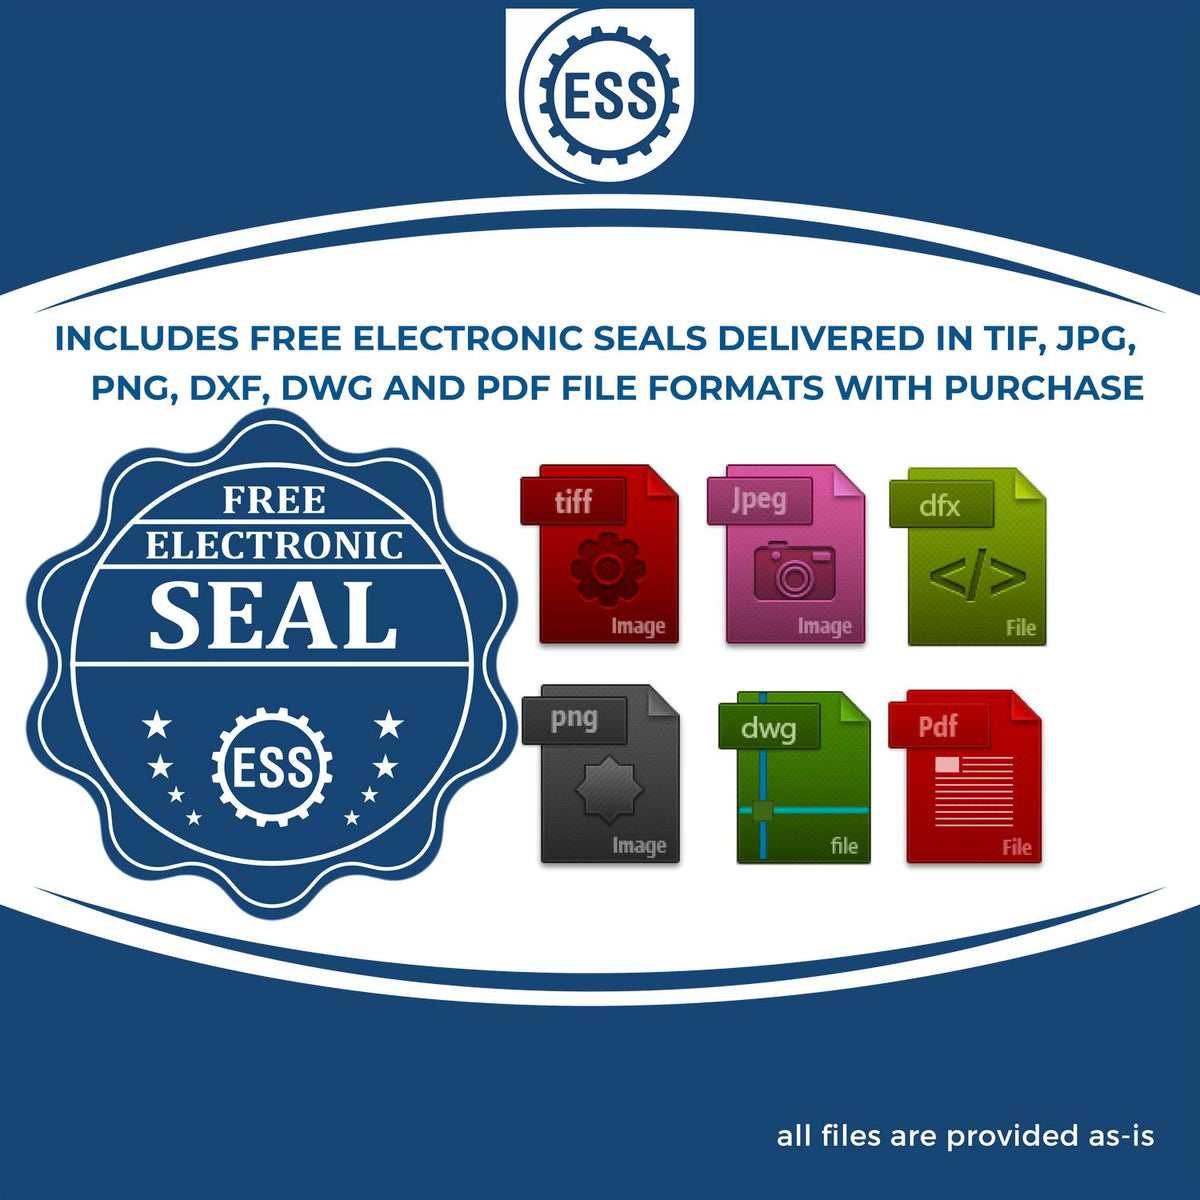 An infographic for the free electronic seal for the Hybrid Illinois Landscape Architect Seal illustrating the different file type icons such as DXF, DWG, TIF, JPG and PNG.